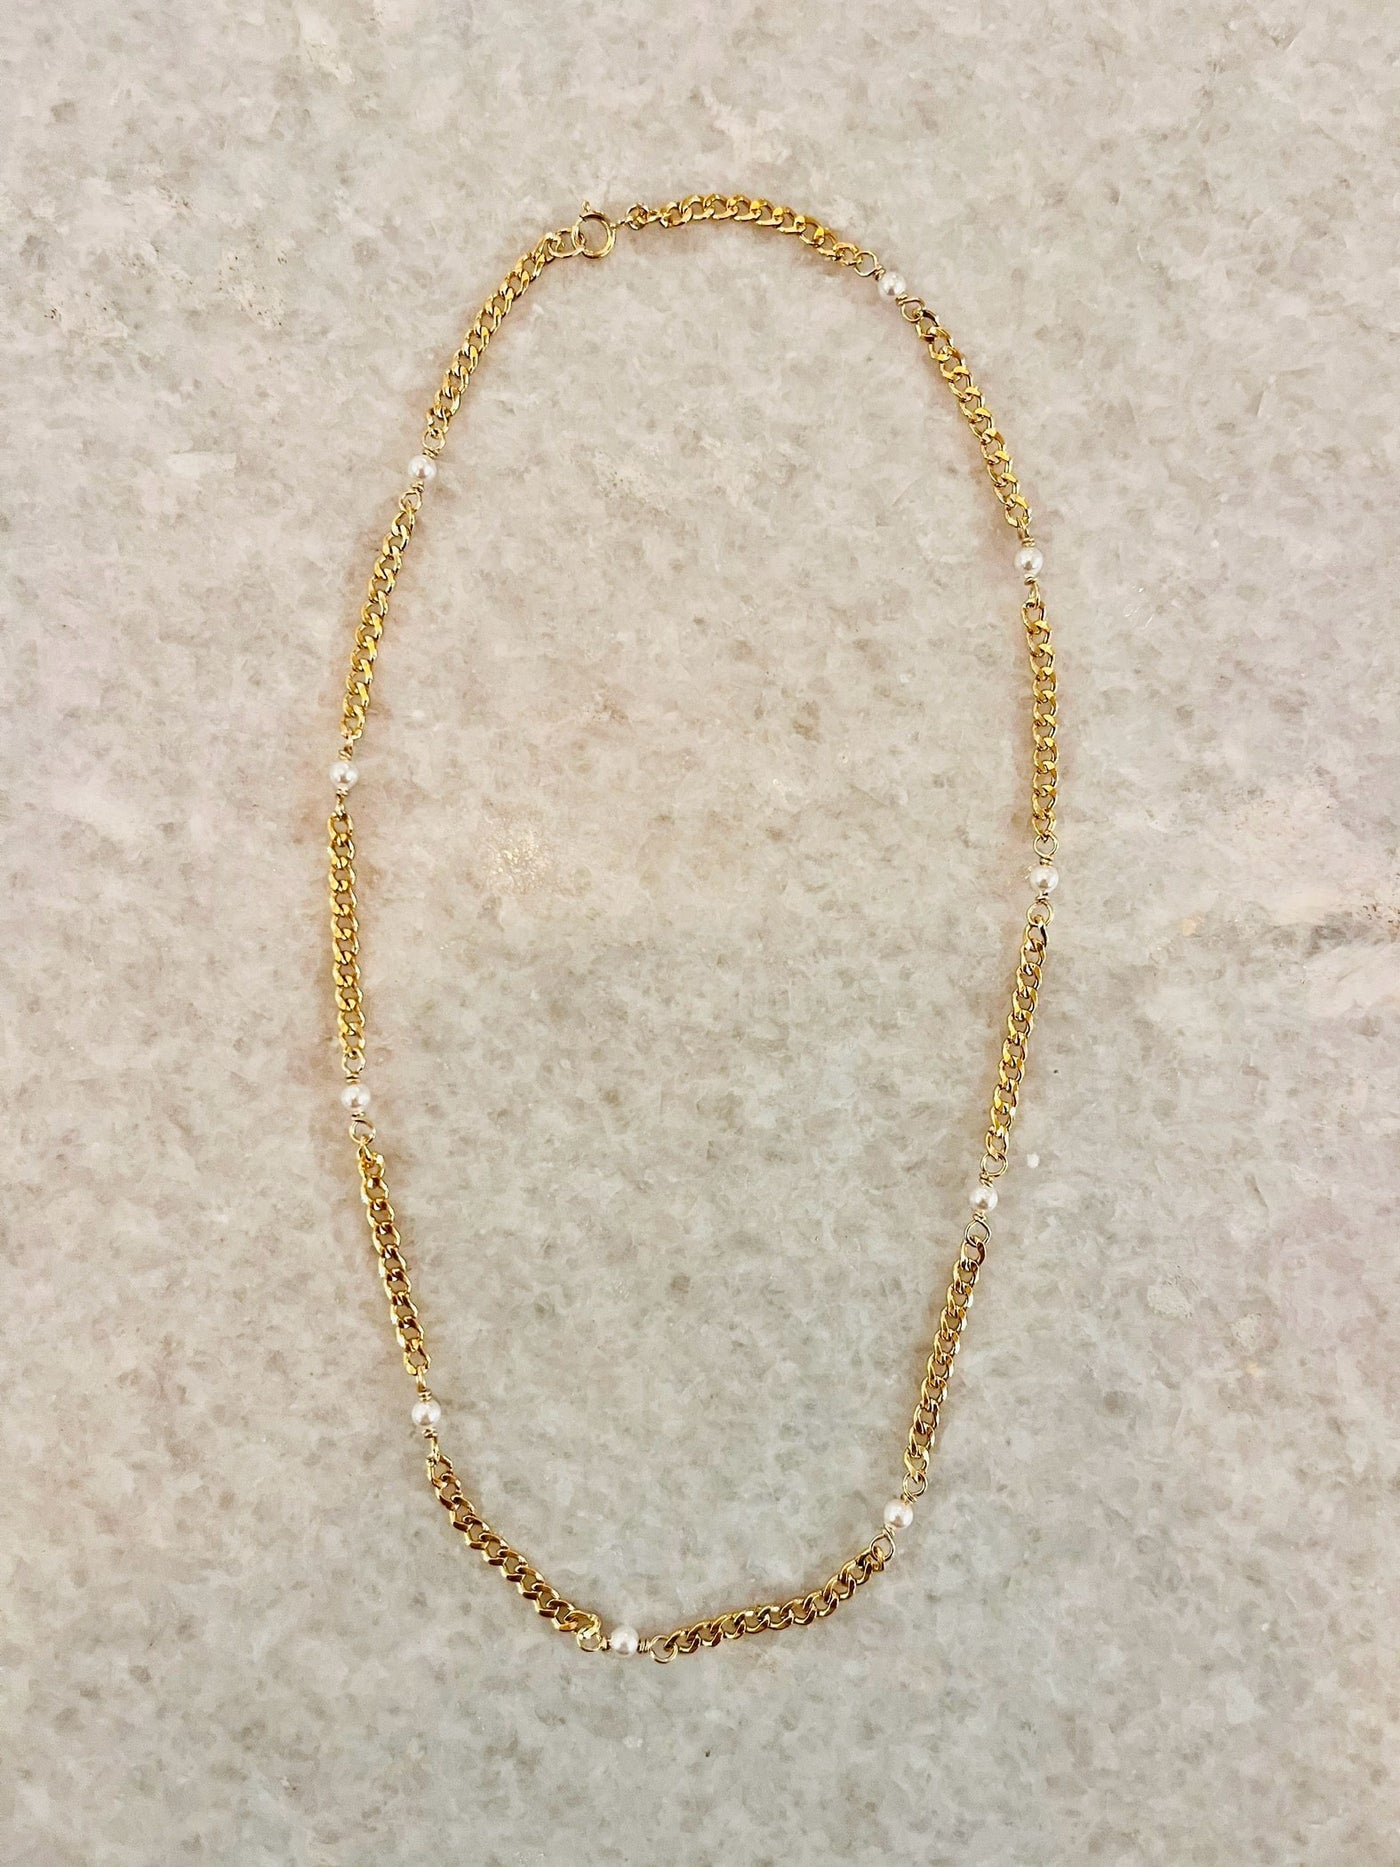 Pearlescent Jewel Chain Necklace 14.5 by Delicate Raymond